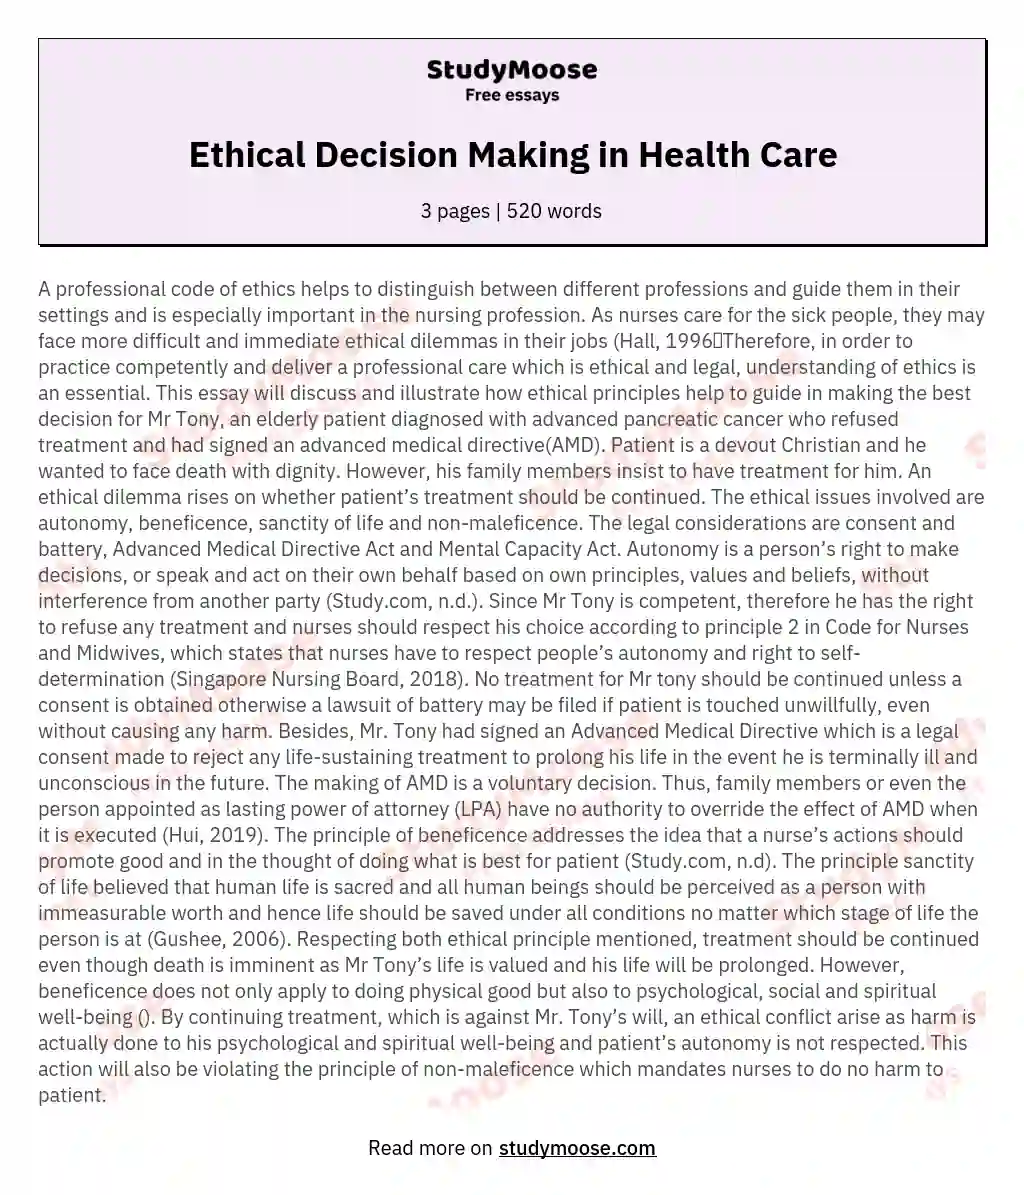 Ethical Decision Making in Health Care